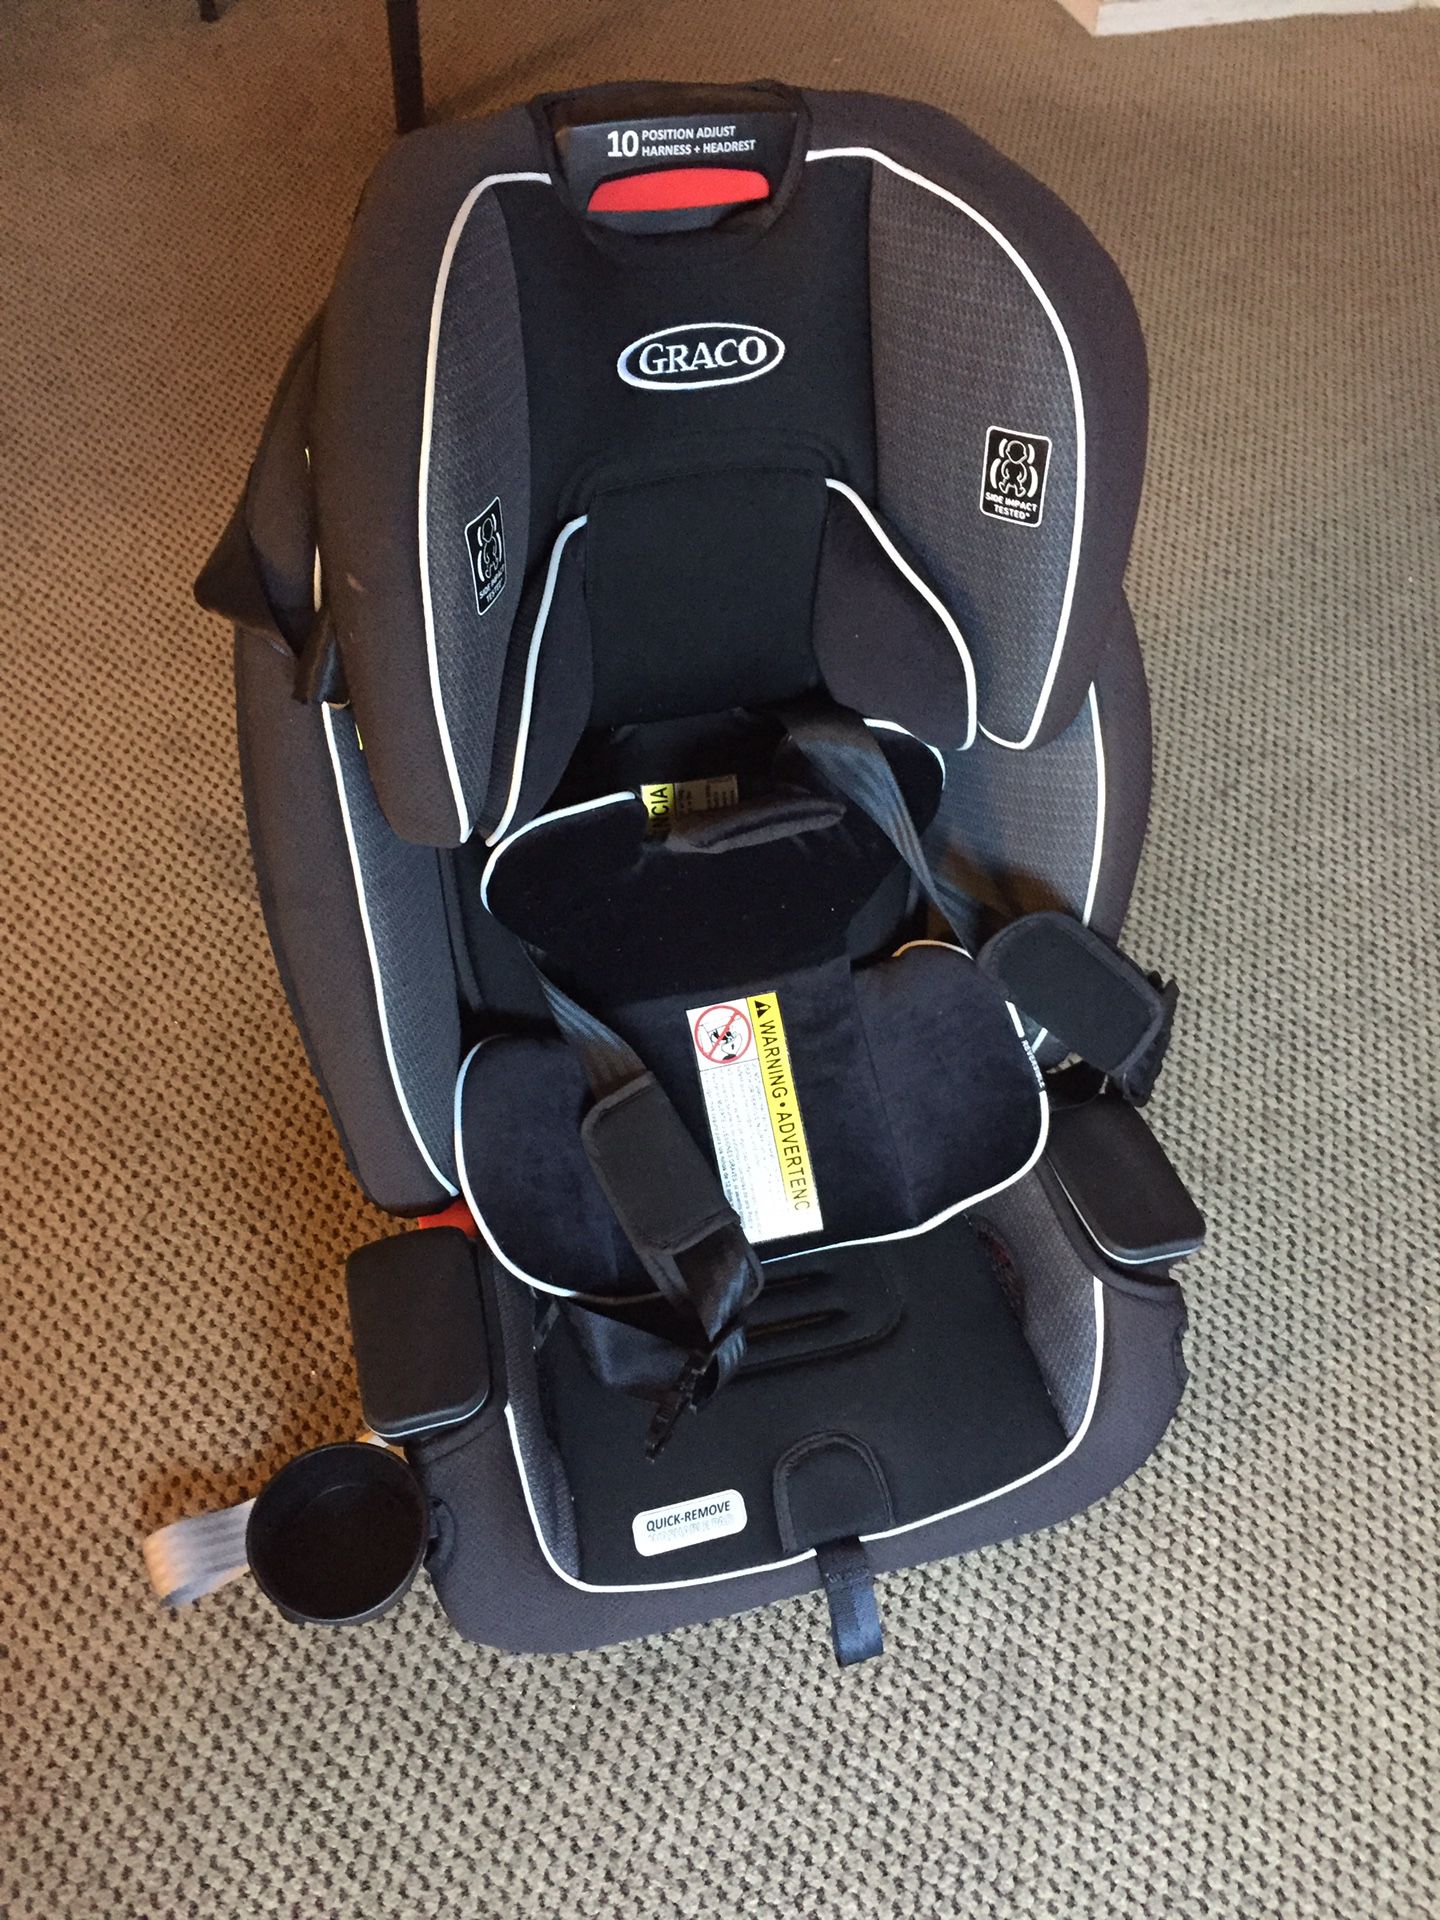 Graco all in one car seat